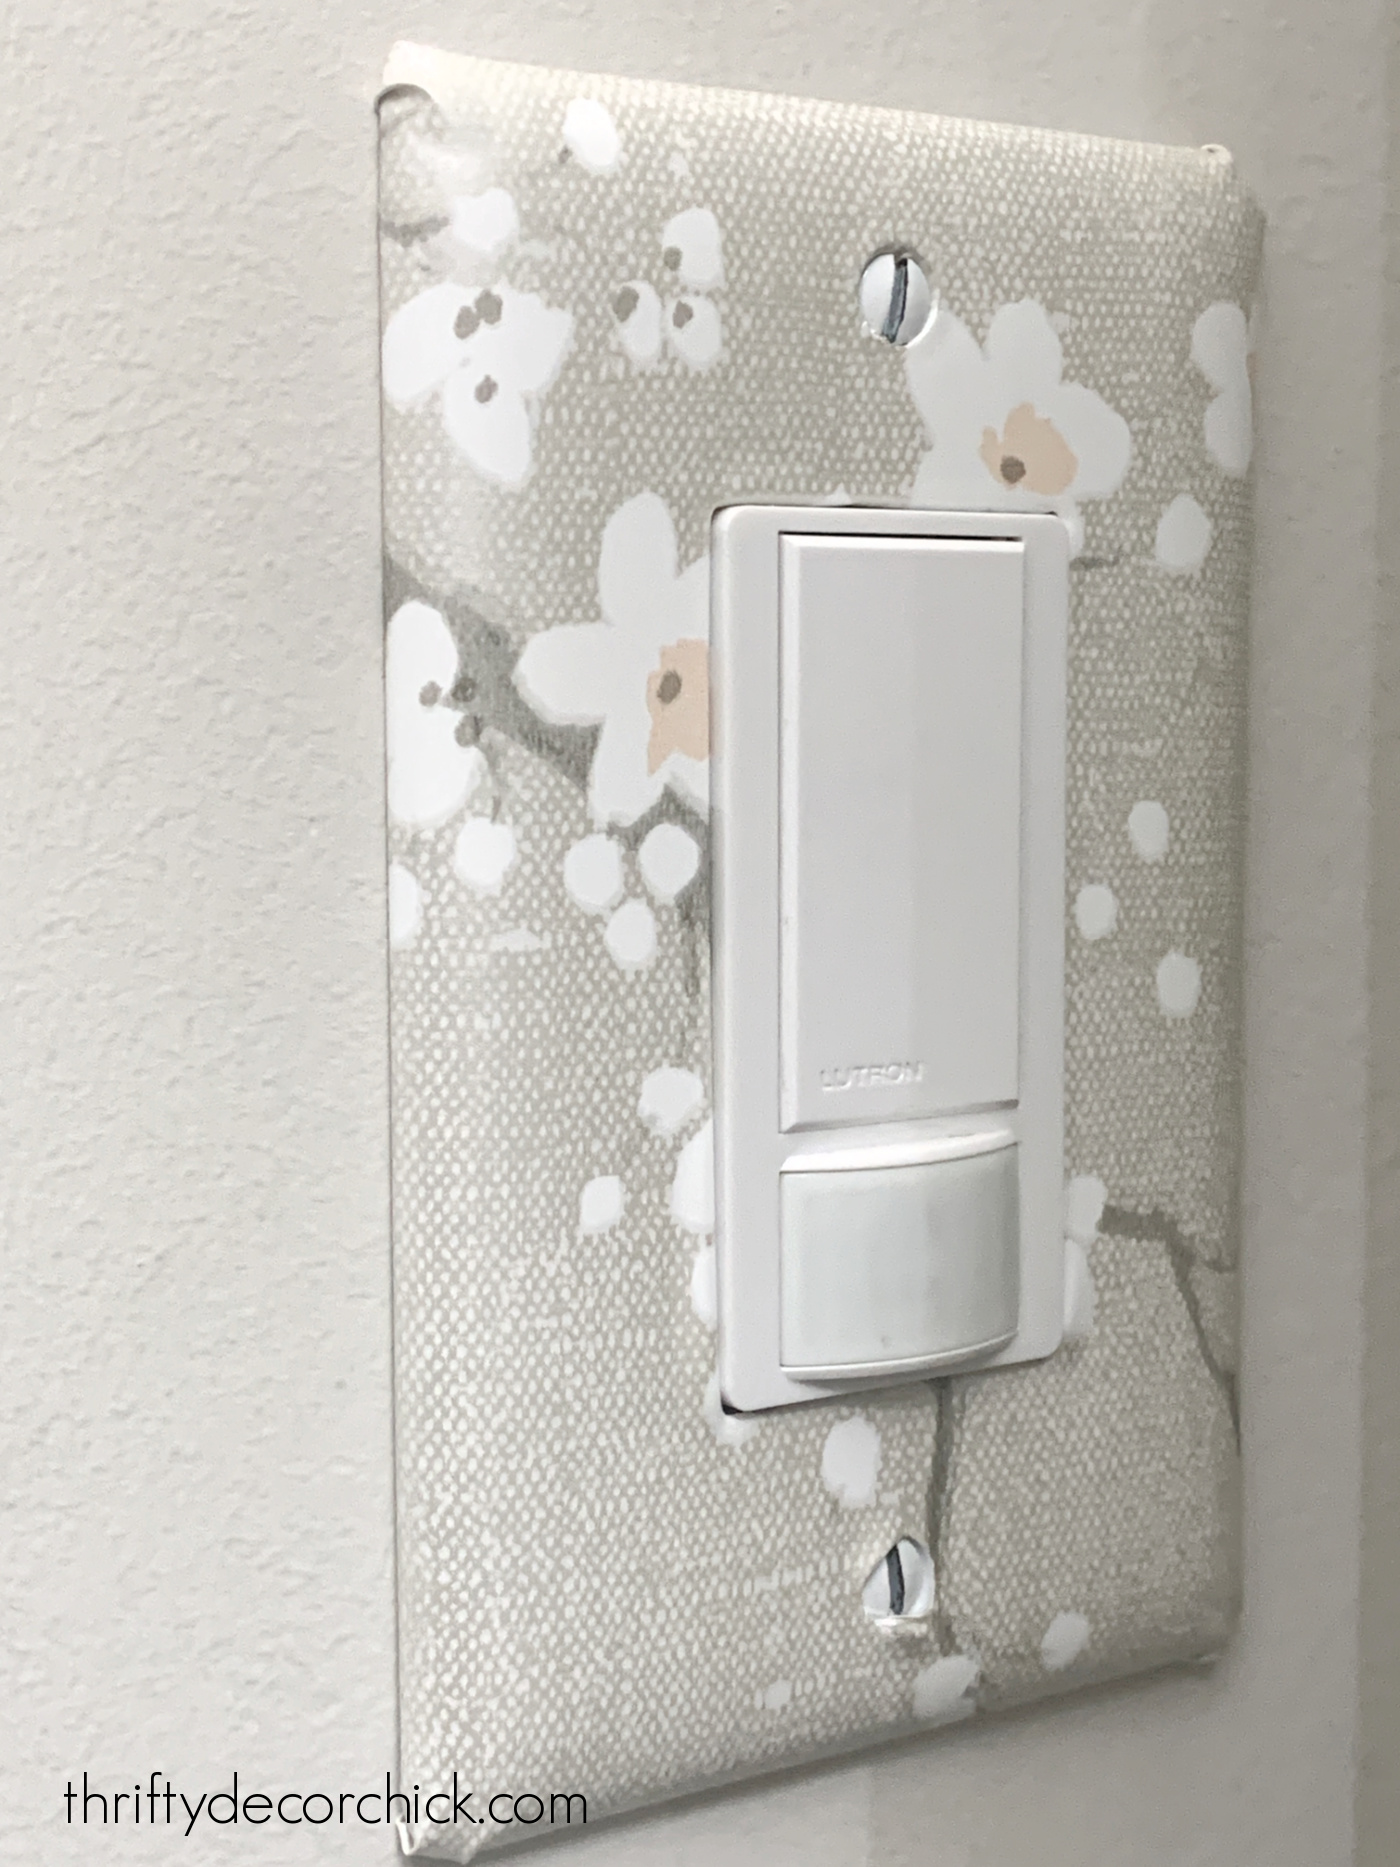 wallpapered switch cover